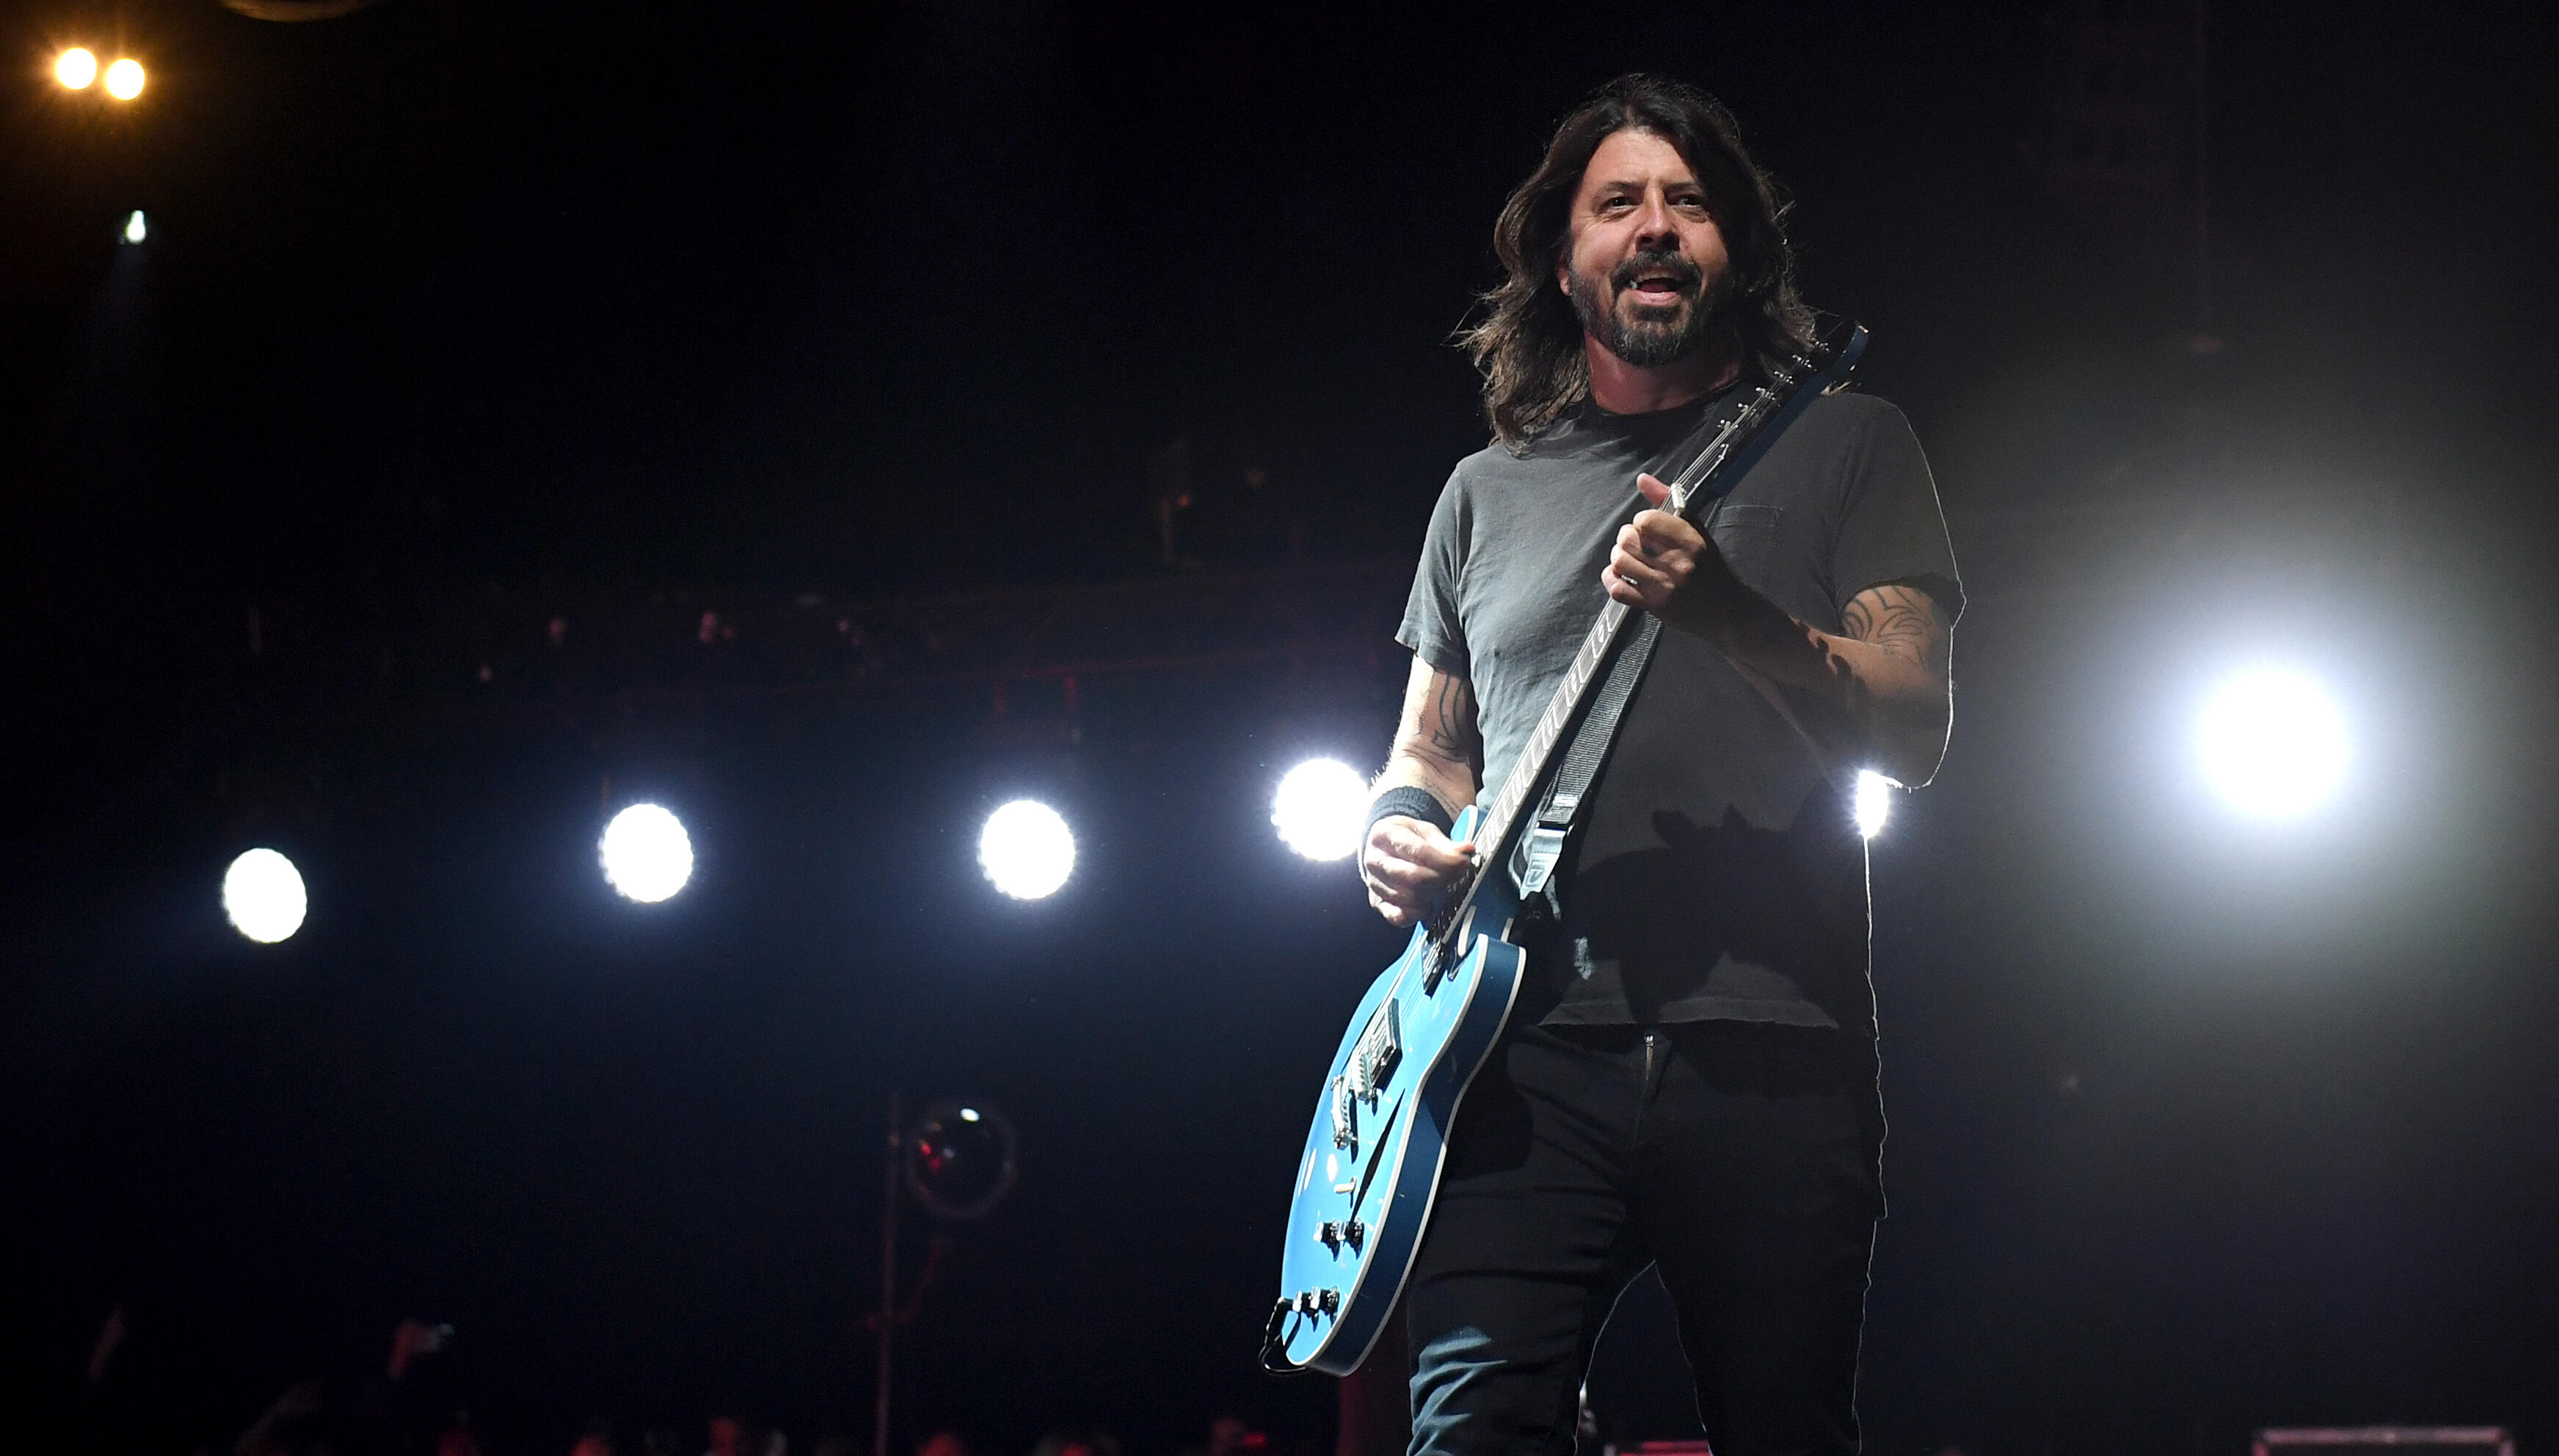 Dave Grohl To Celebrate Hanukkah By Covering Jewish Artists For 8